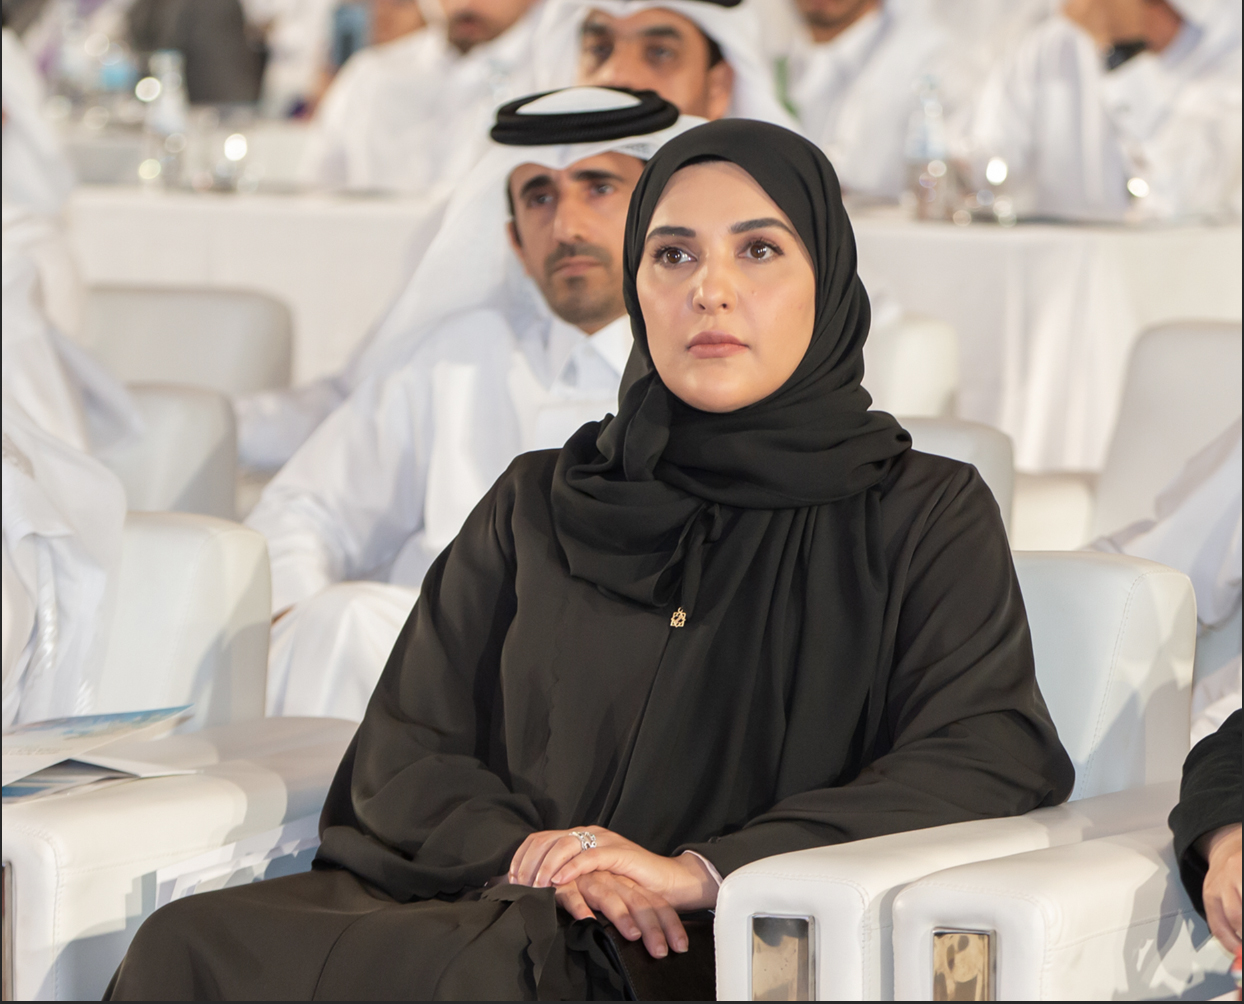 NHRC Chairperson Commends Qatar's Achievements in Women's Rights Field